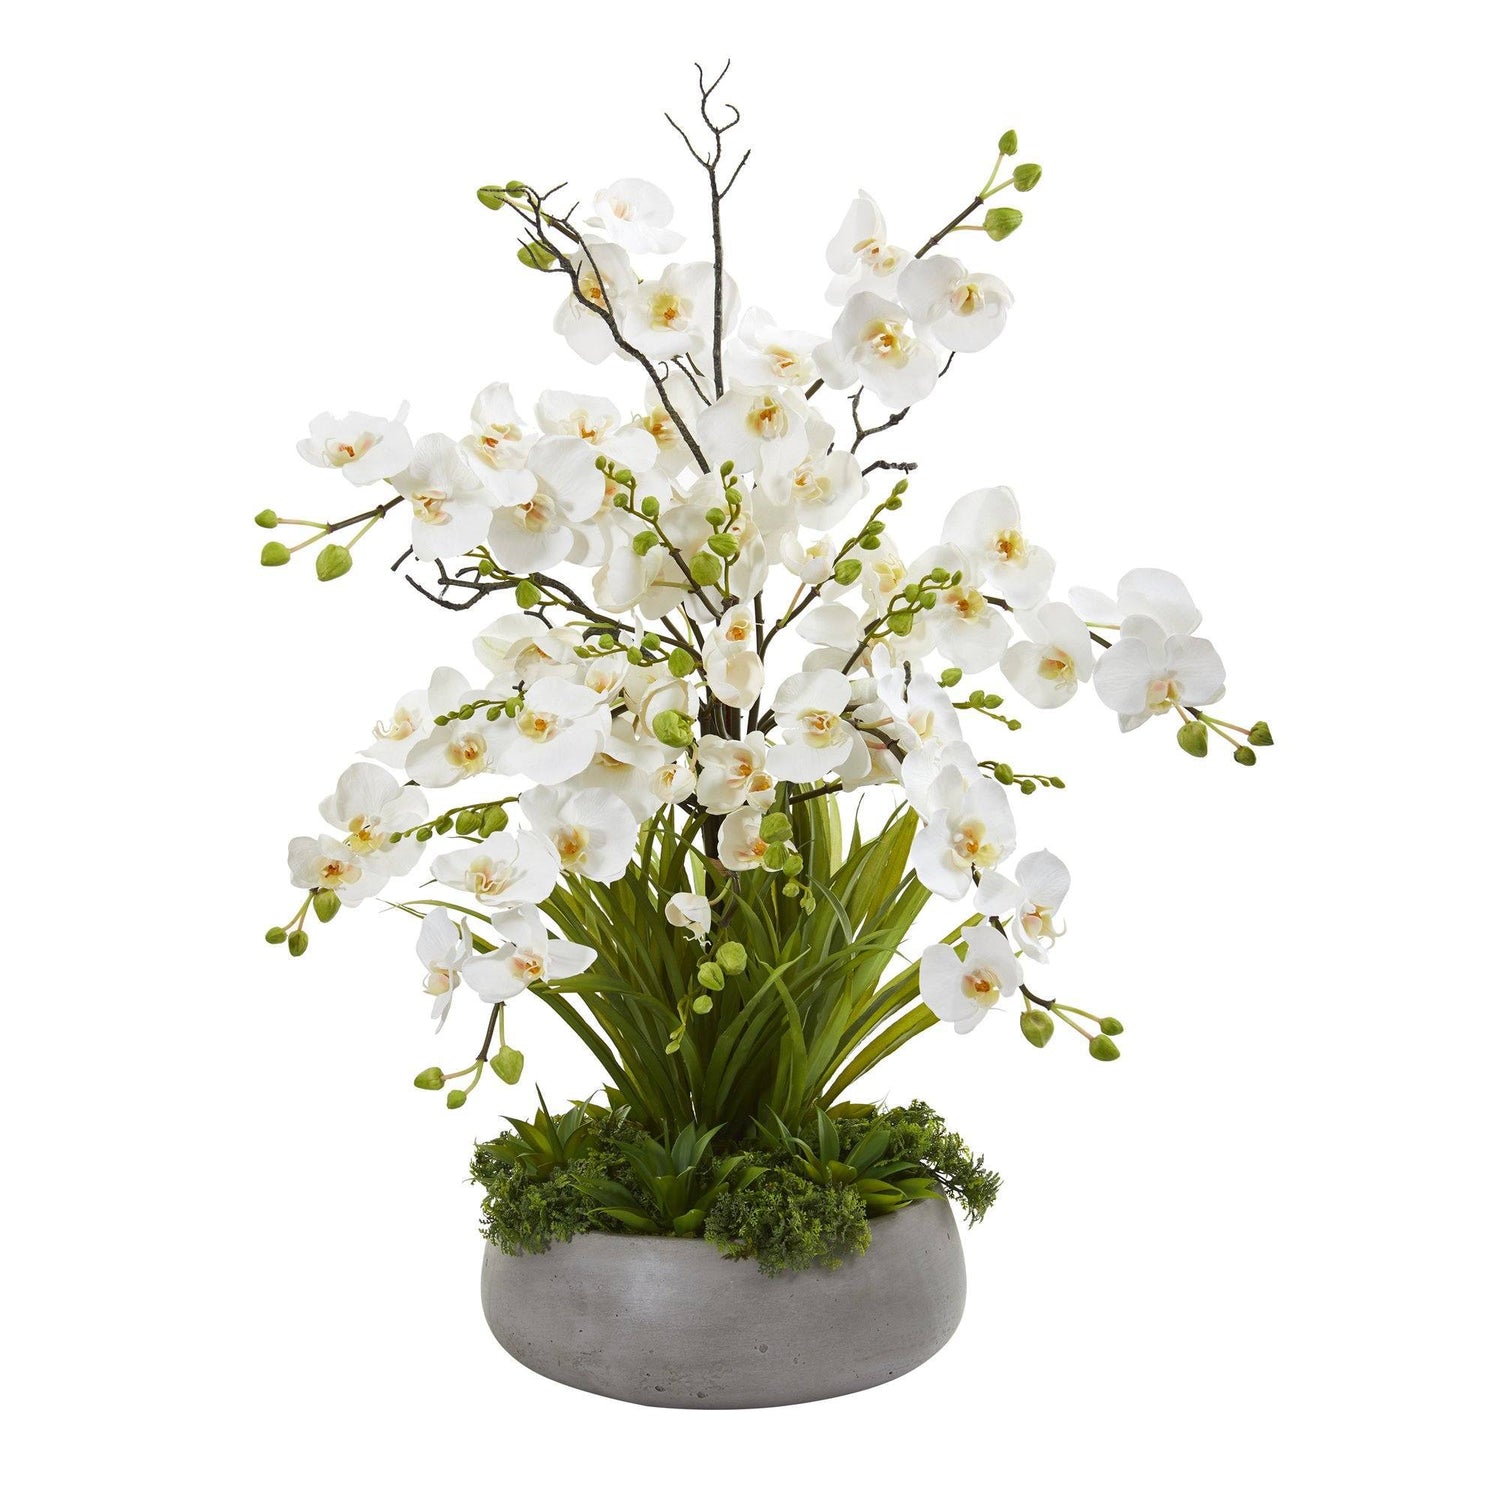 3’ Phalaenopsis Orchid and Agave Artificial Arrangement in Gray Vase